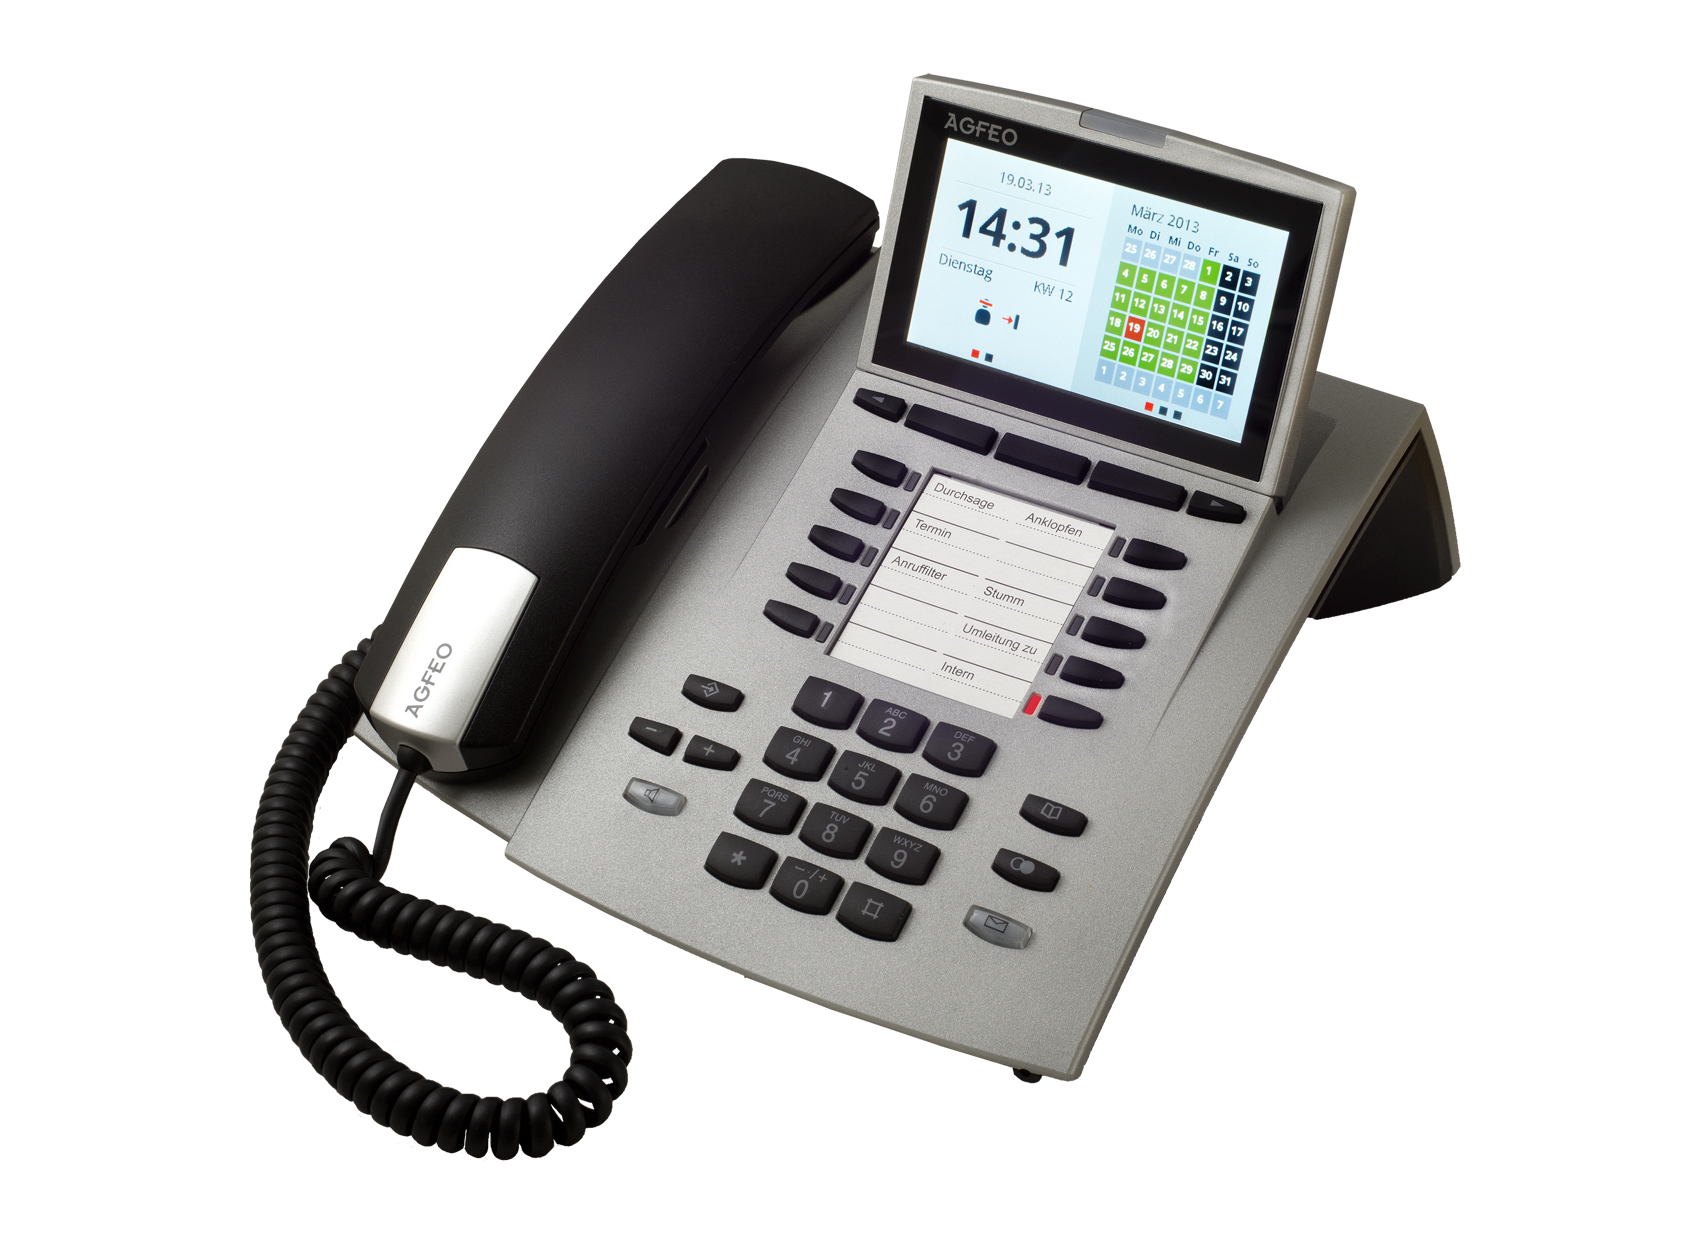 6101323 AGFEO ST 45 IP - IP Phone - Silver - Wired handset - Desk/Wall - 1000 entries - Digital